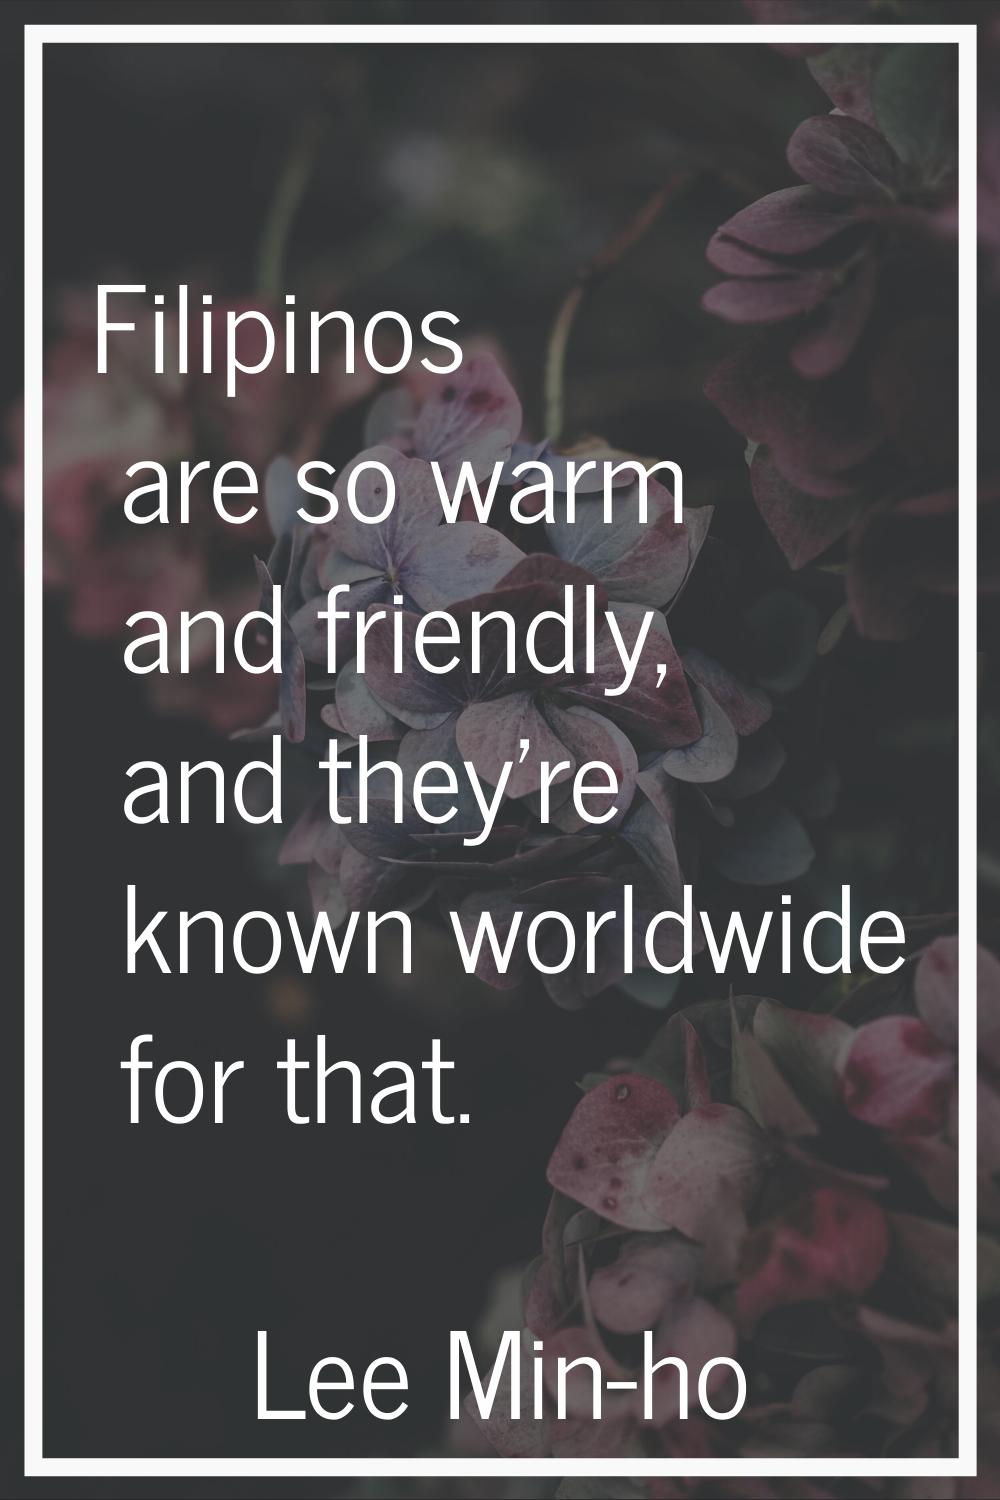 Filipinos are so warm and friendly, and they're known worldwide for that.